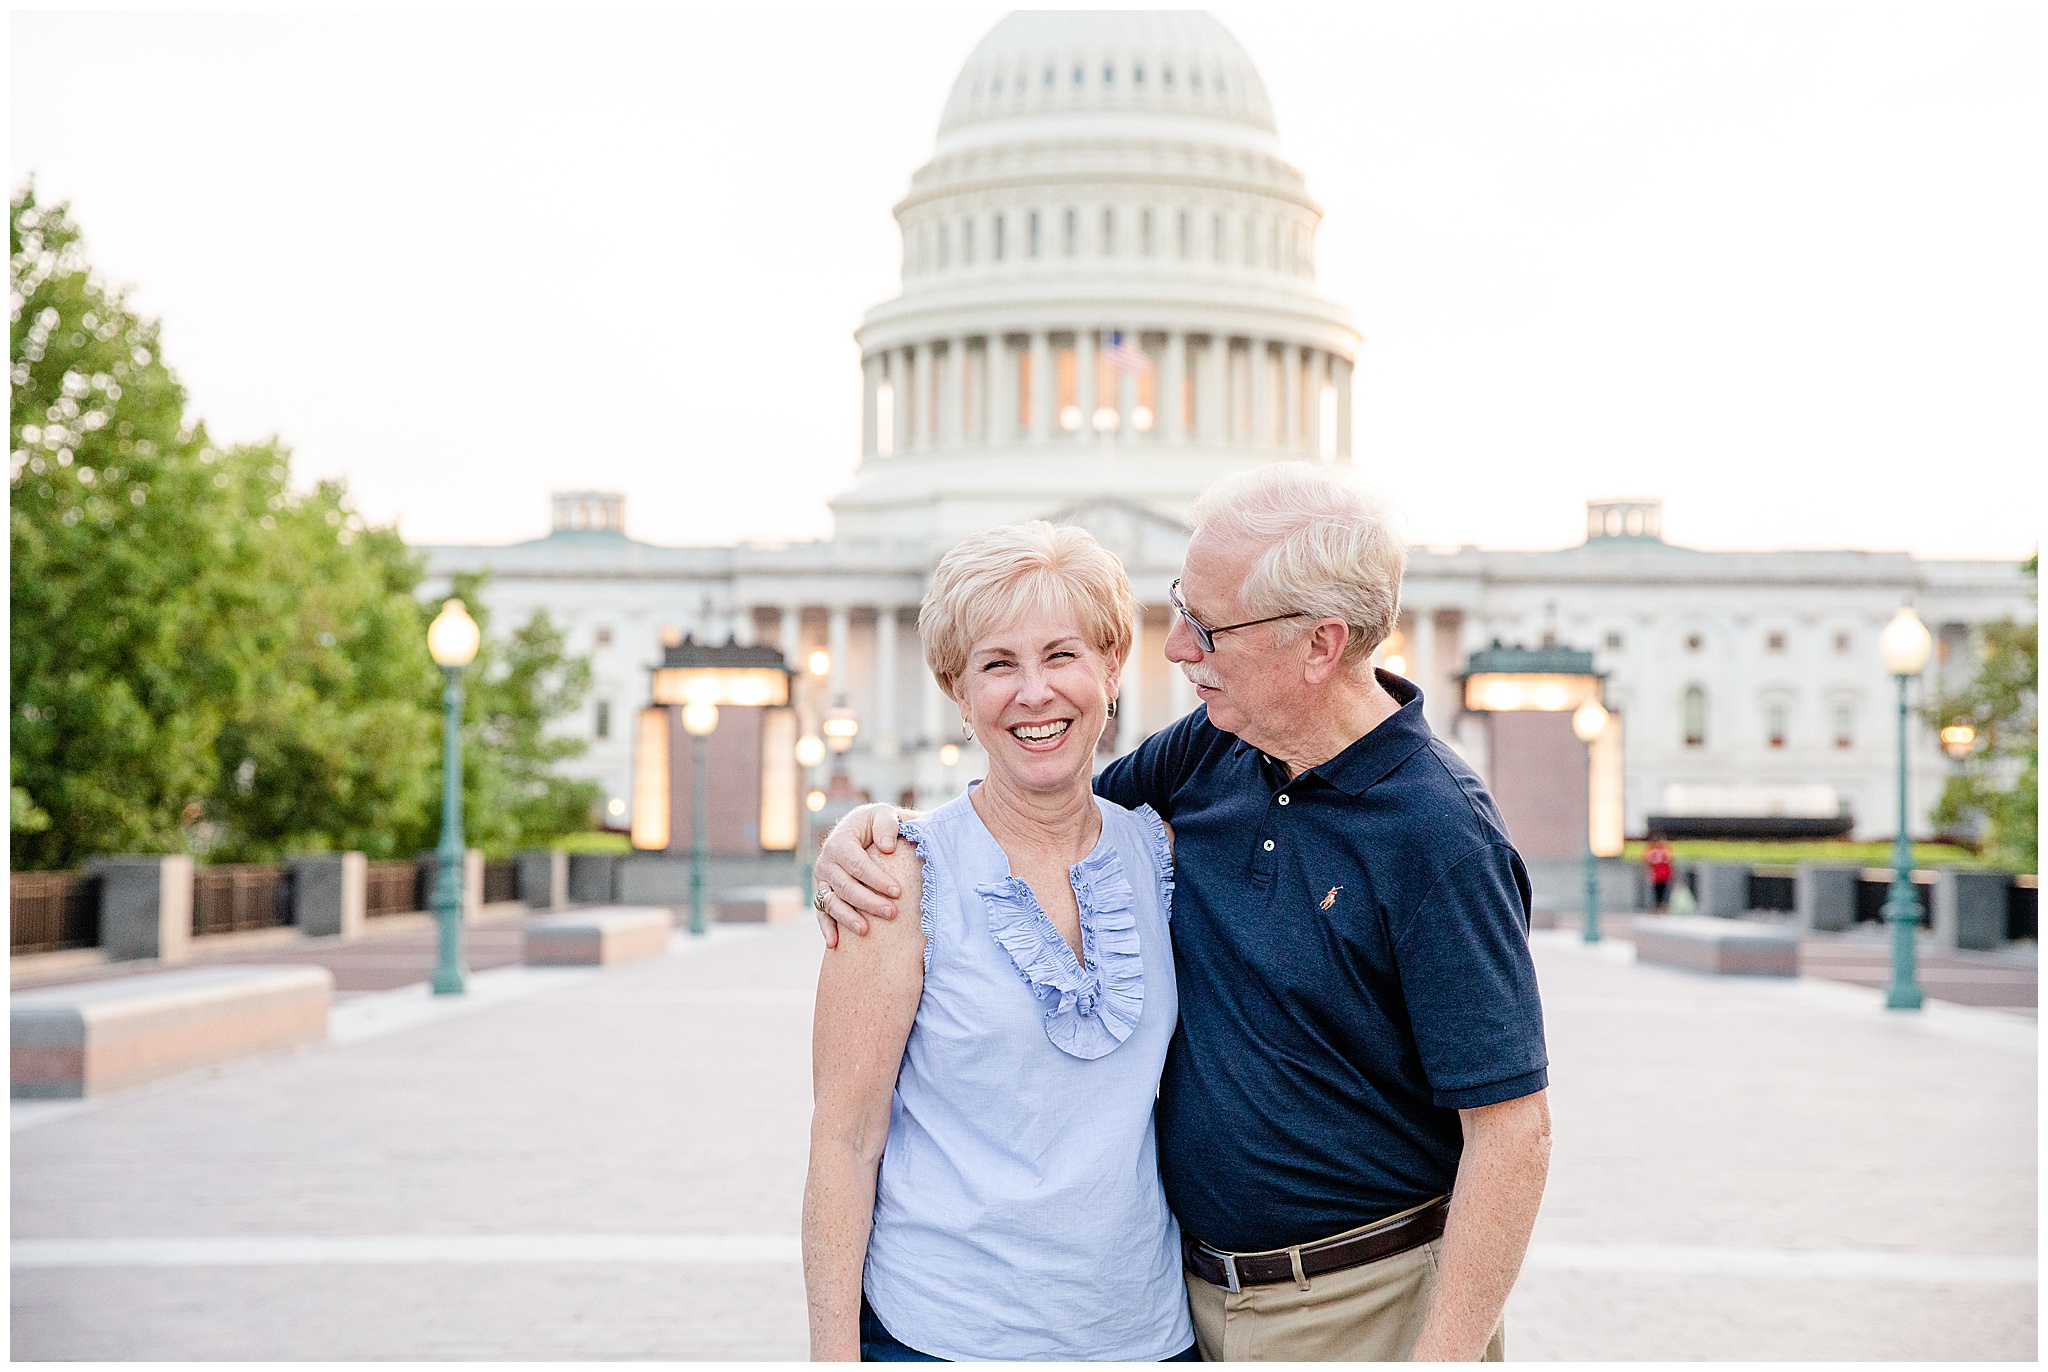 Gorgeous Photos of Grandparents at the Capitol in Washington DC by Bethany M. Brasfield Kofmehl